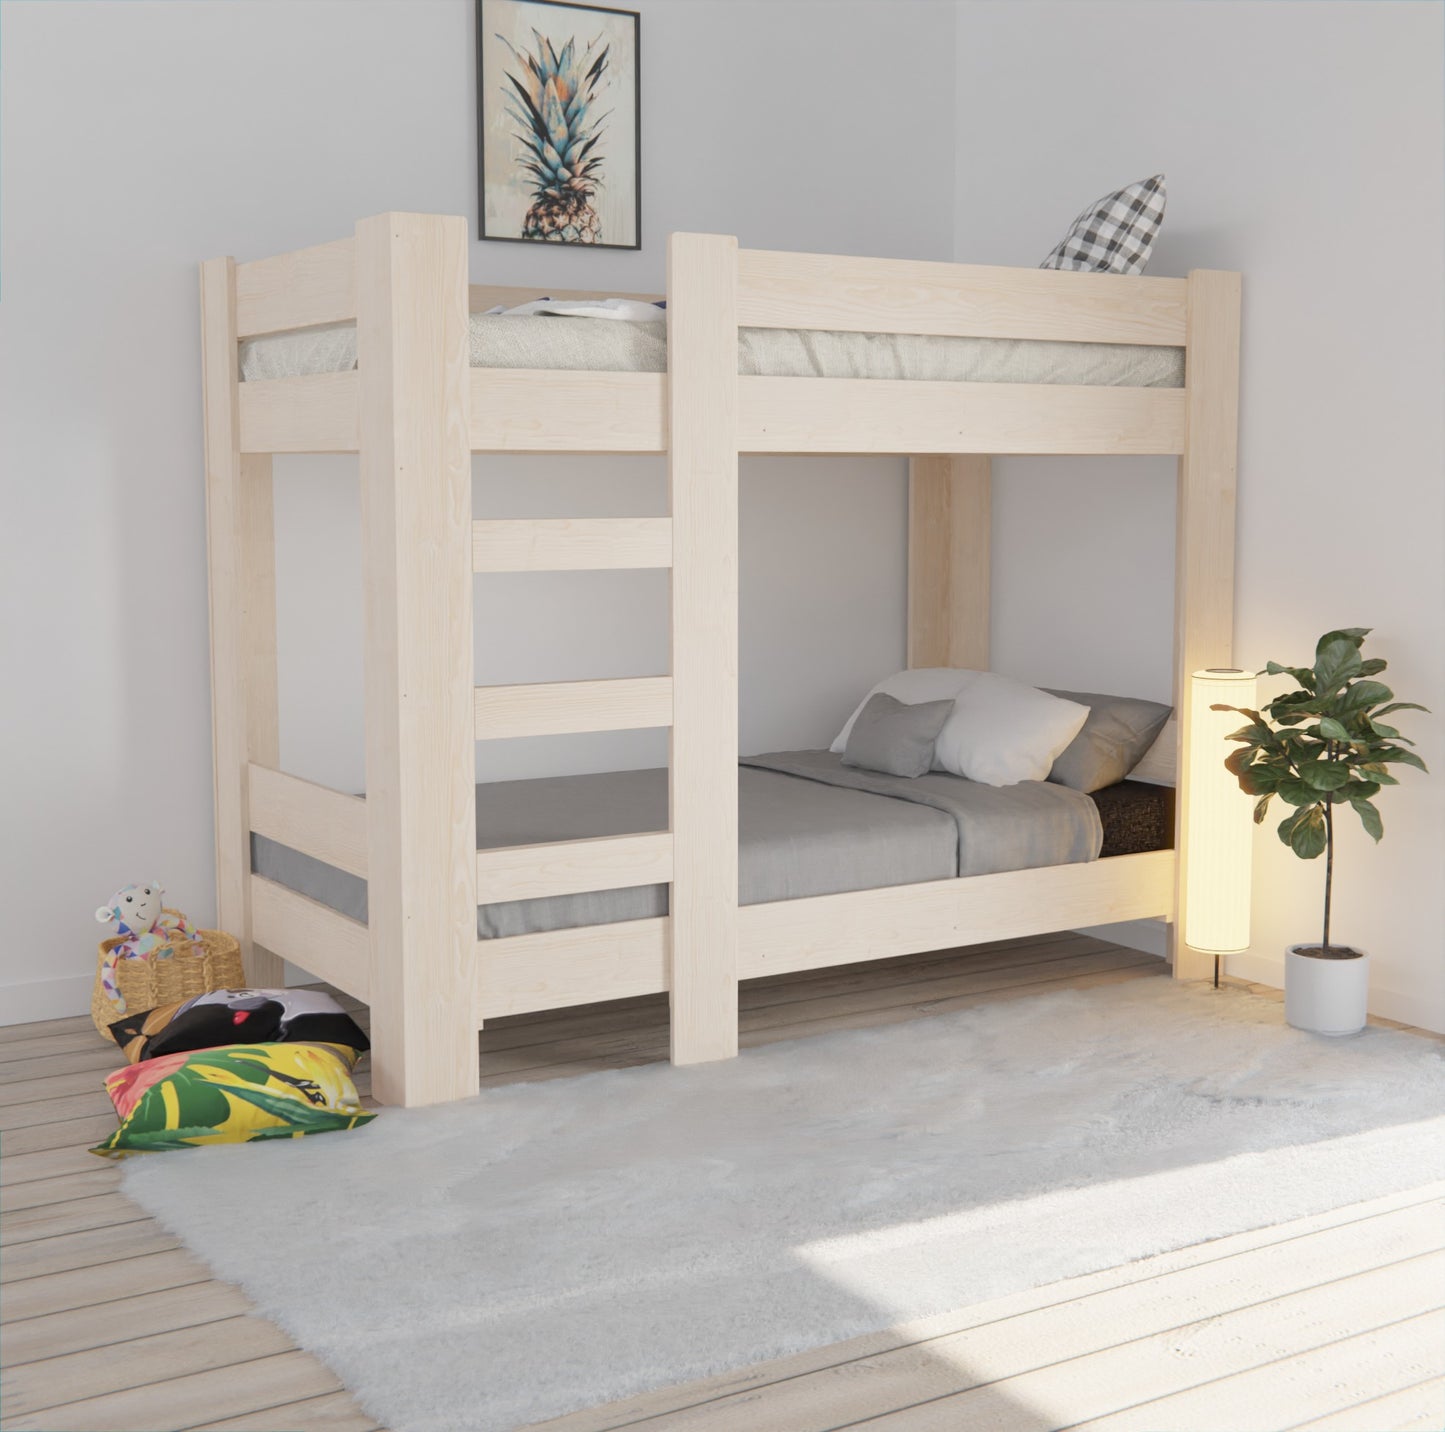 Upgrade your kid's room with our versatile bunk bed. With adjustable lower bunk height and optional drawer, it's perfect for growing needs.